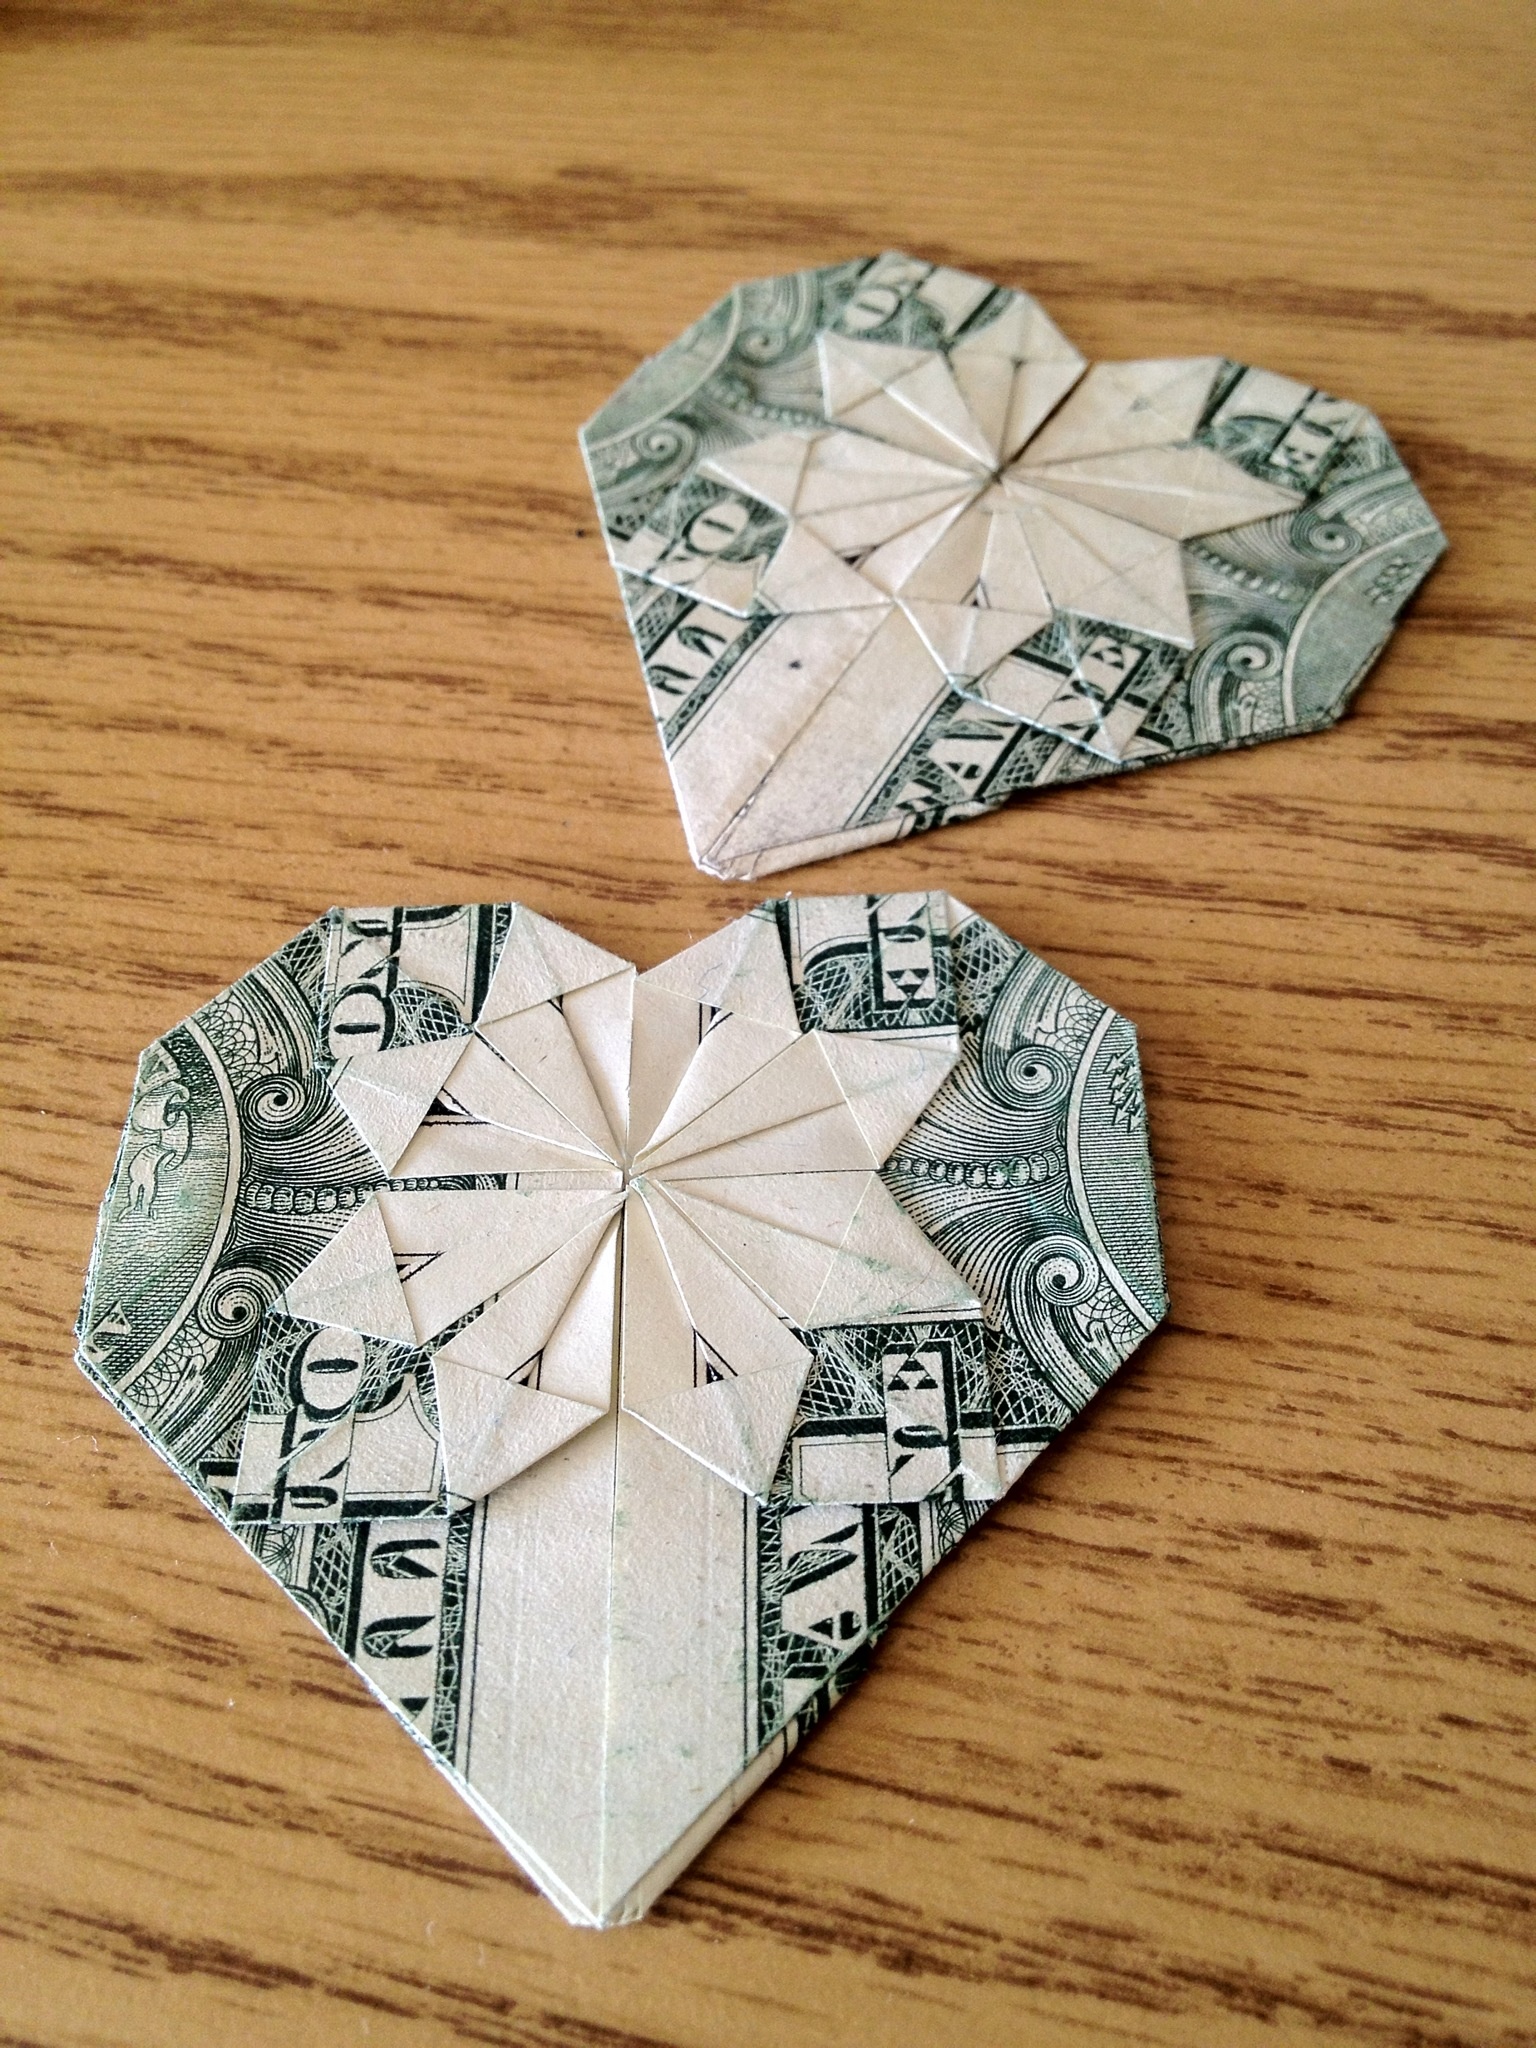 How To Make An Origami Heart From A Dollar B C Guides